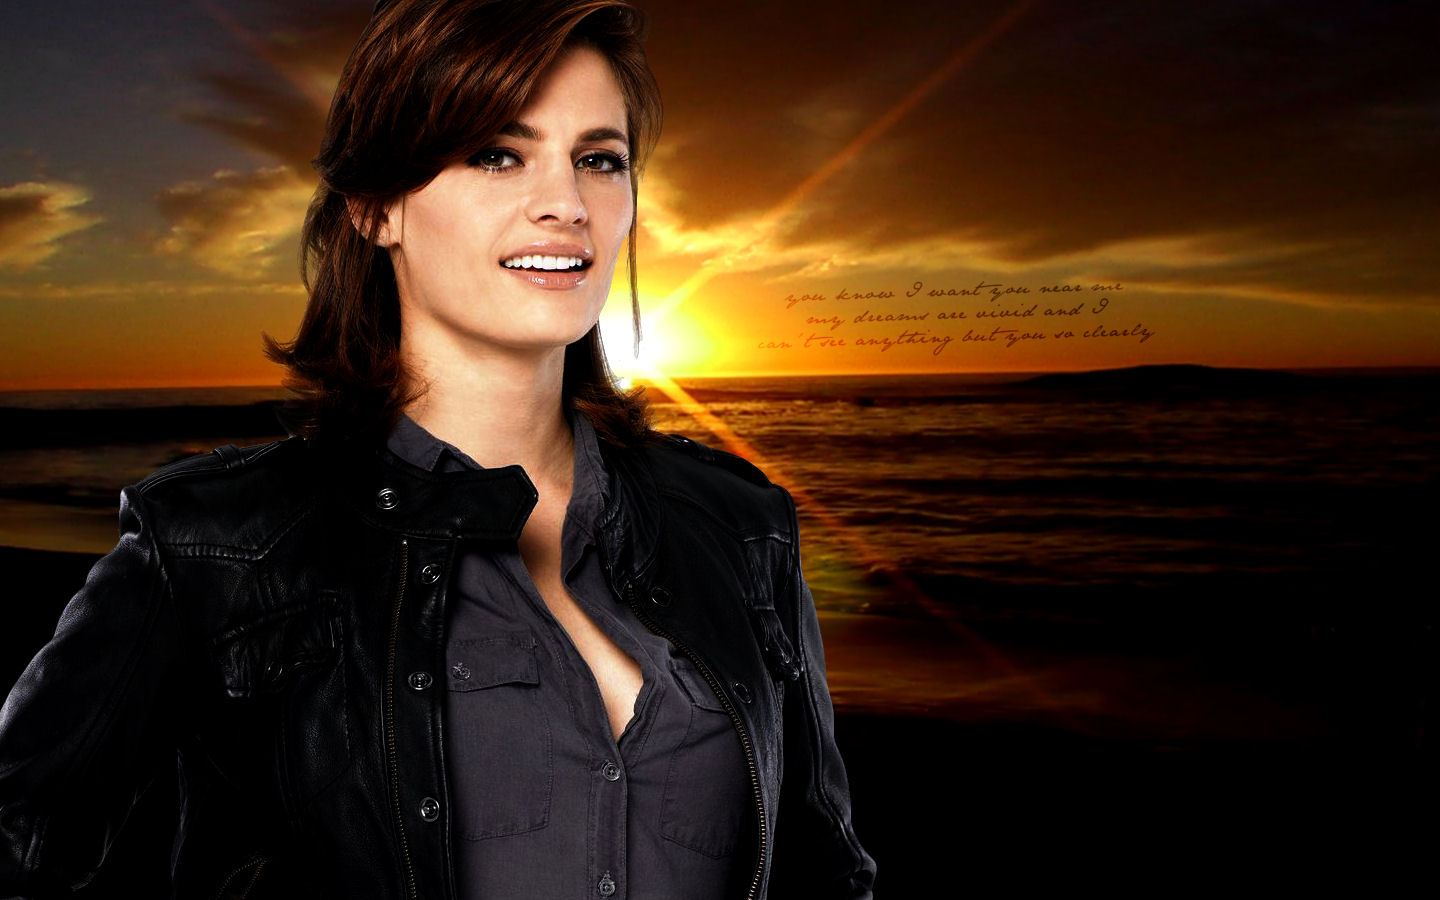 Detective_Kate_Beckett_Sunset_by_michyge